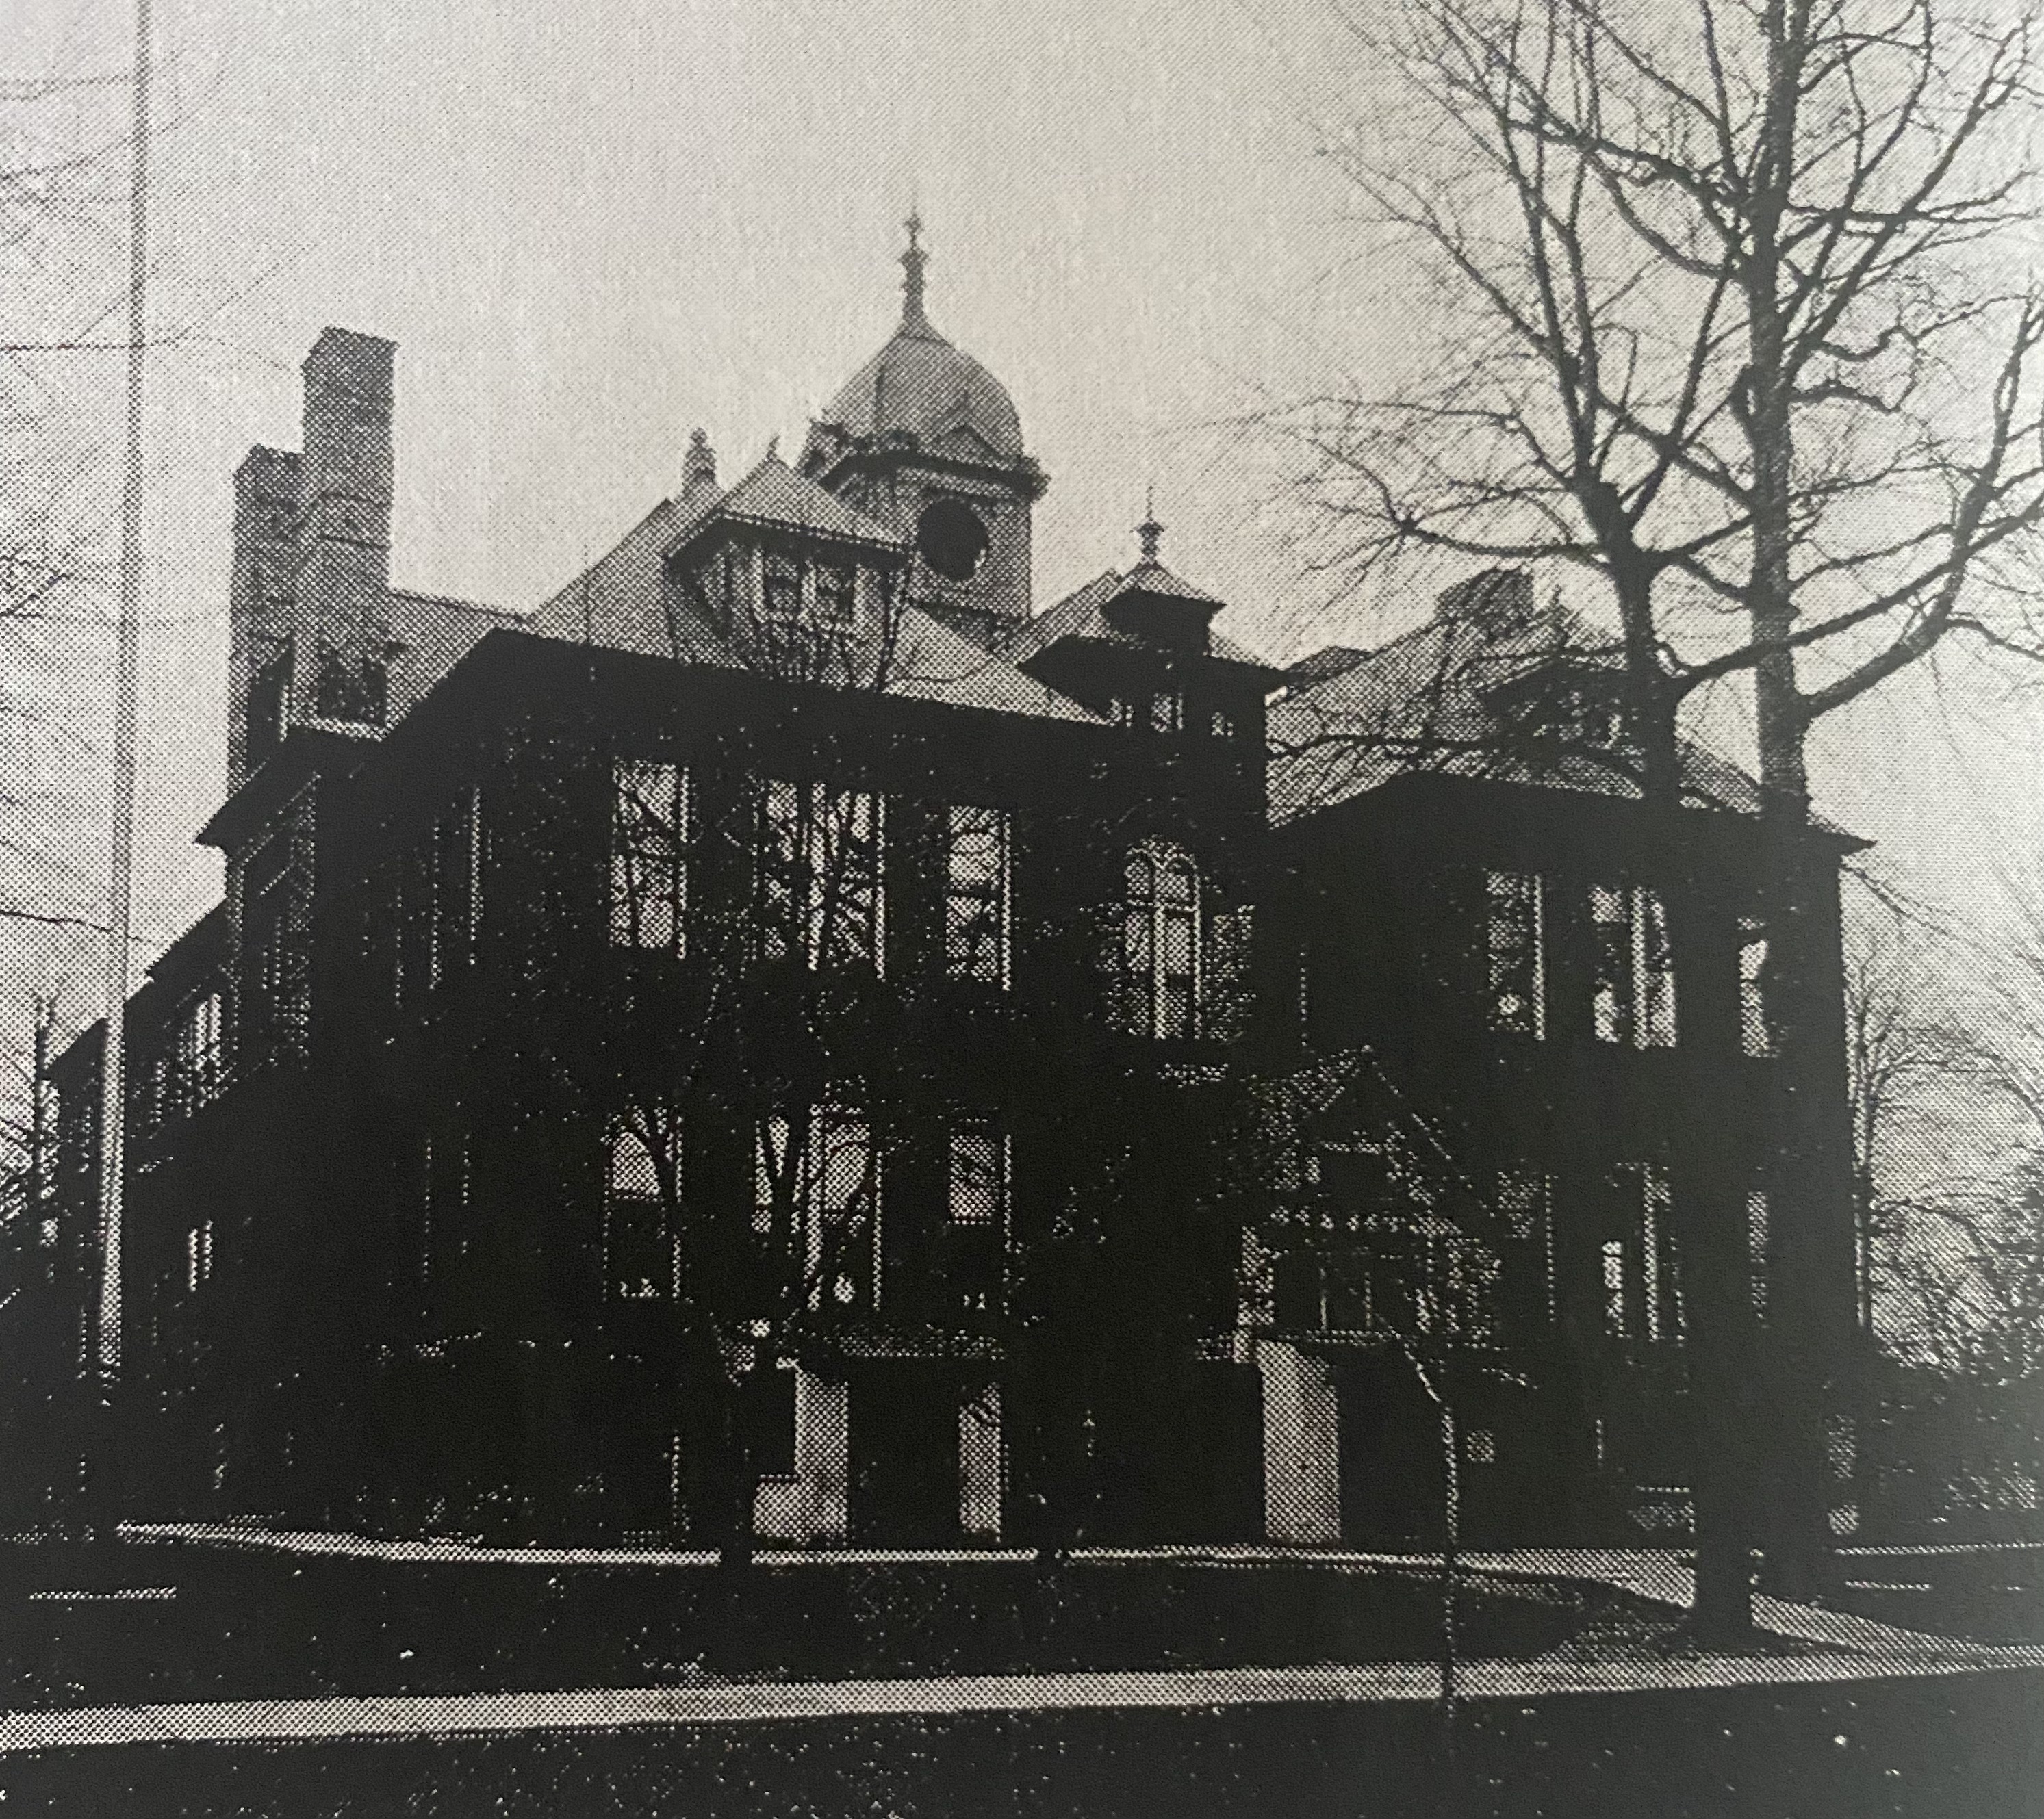 first Lowell Elementary School in black and white